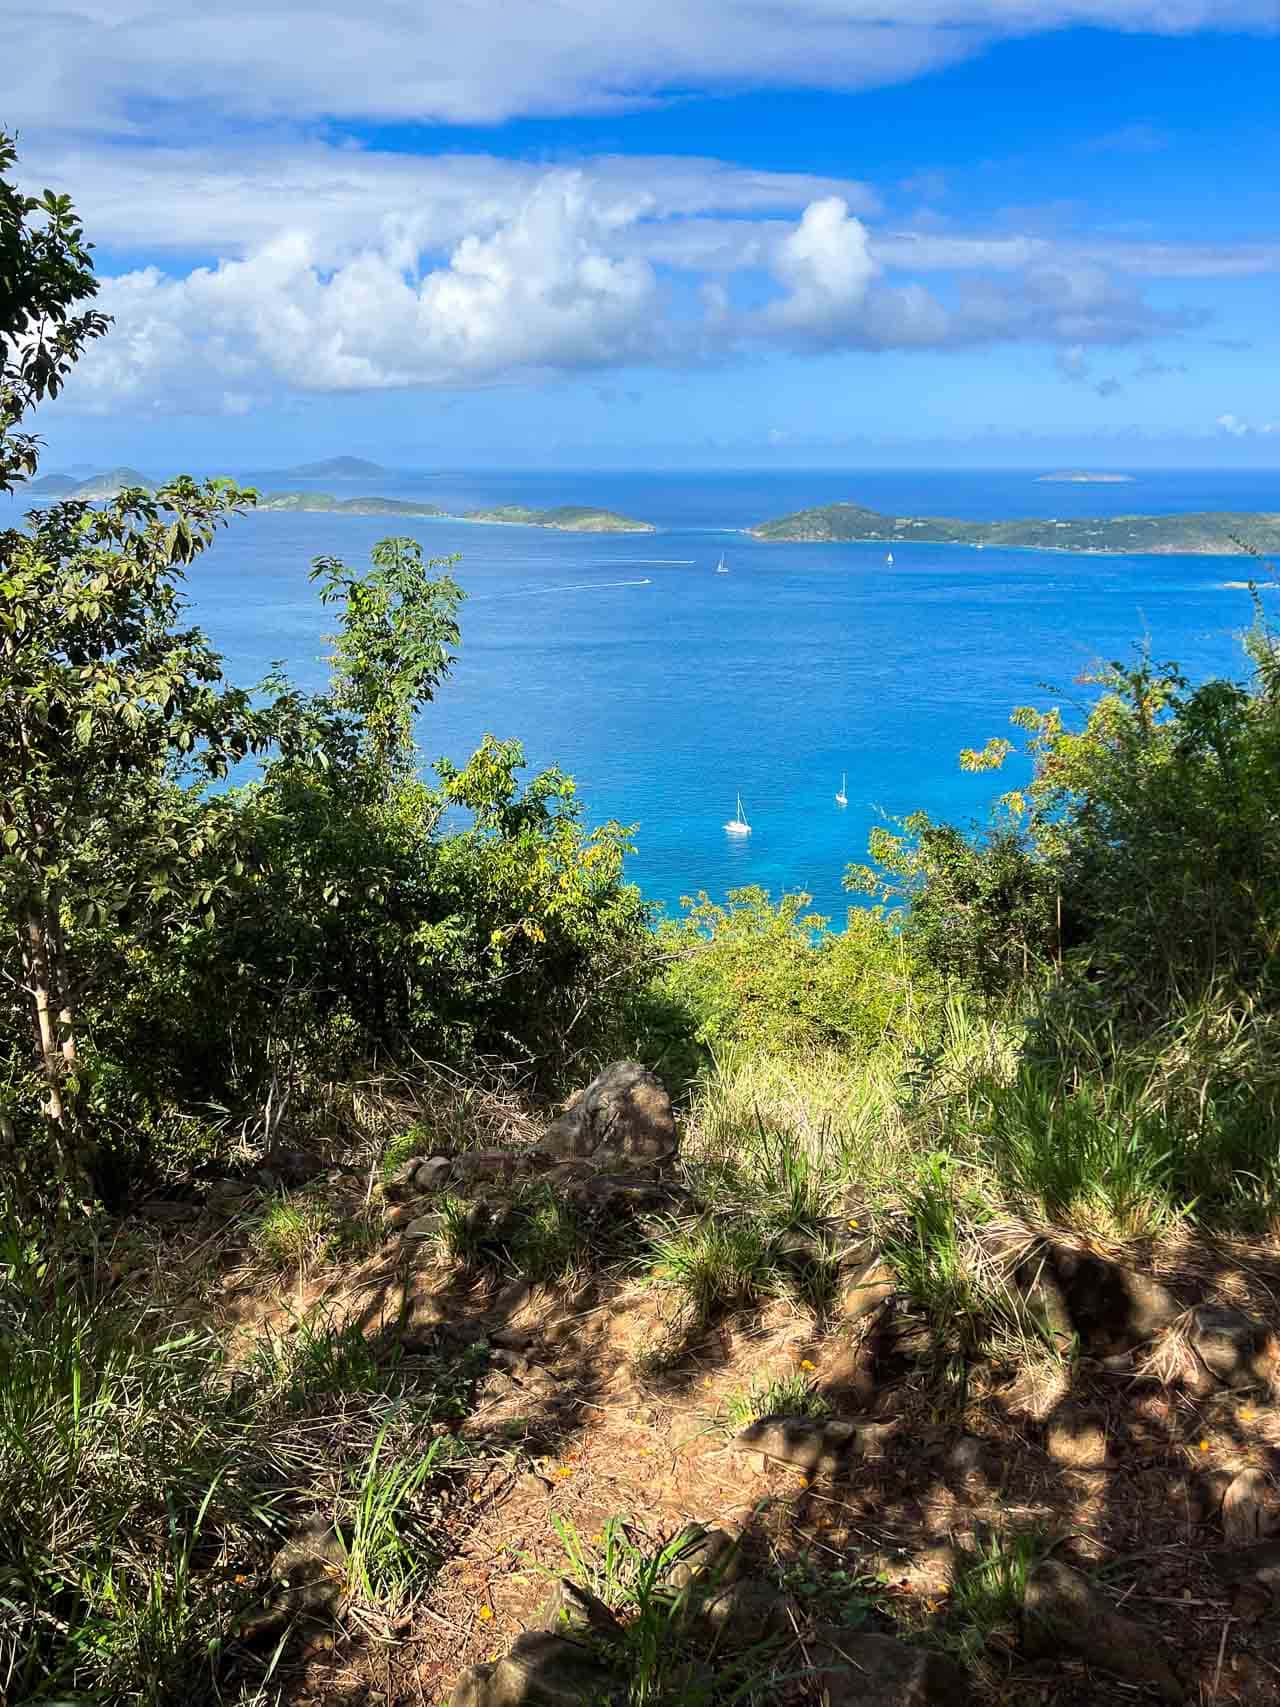 View from the Caneel Hill Trail in Virgin Islands National Park